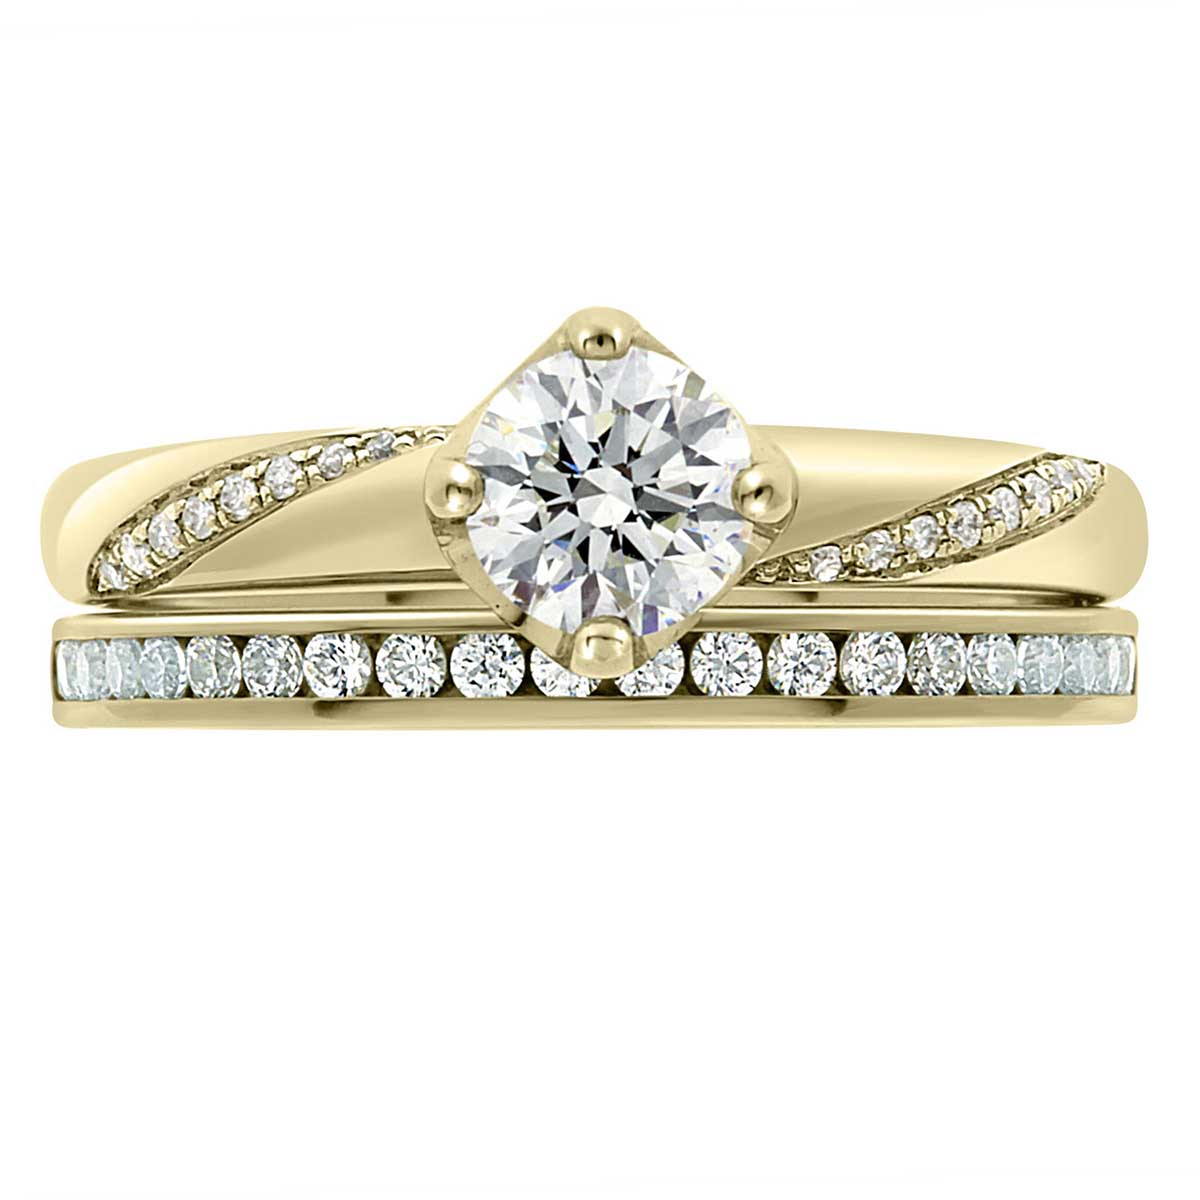 Crossover Band Engagement Ring made from yellow gold with a diamond wedding ring